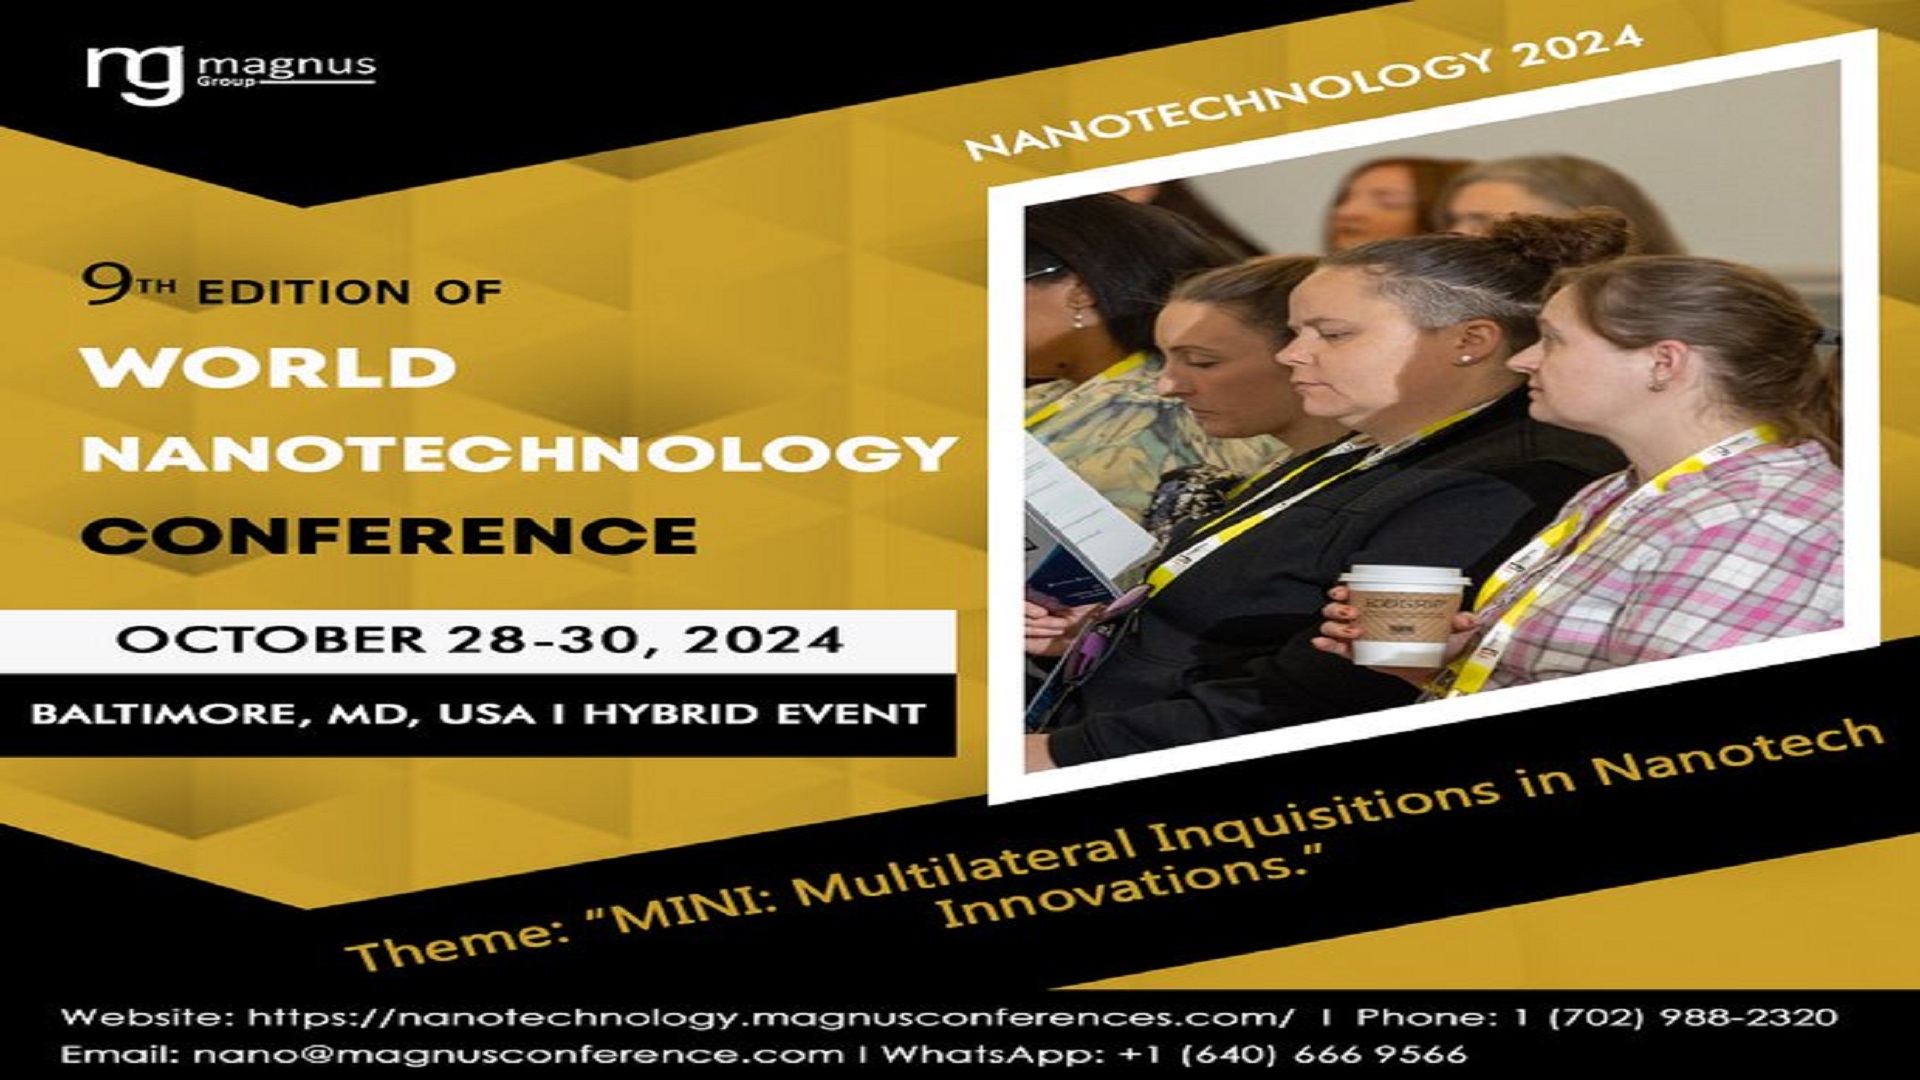 9th Edition of World Nanotechnology Conference, Baltimore, Maryland, United States